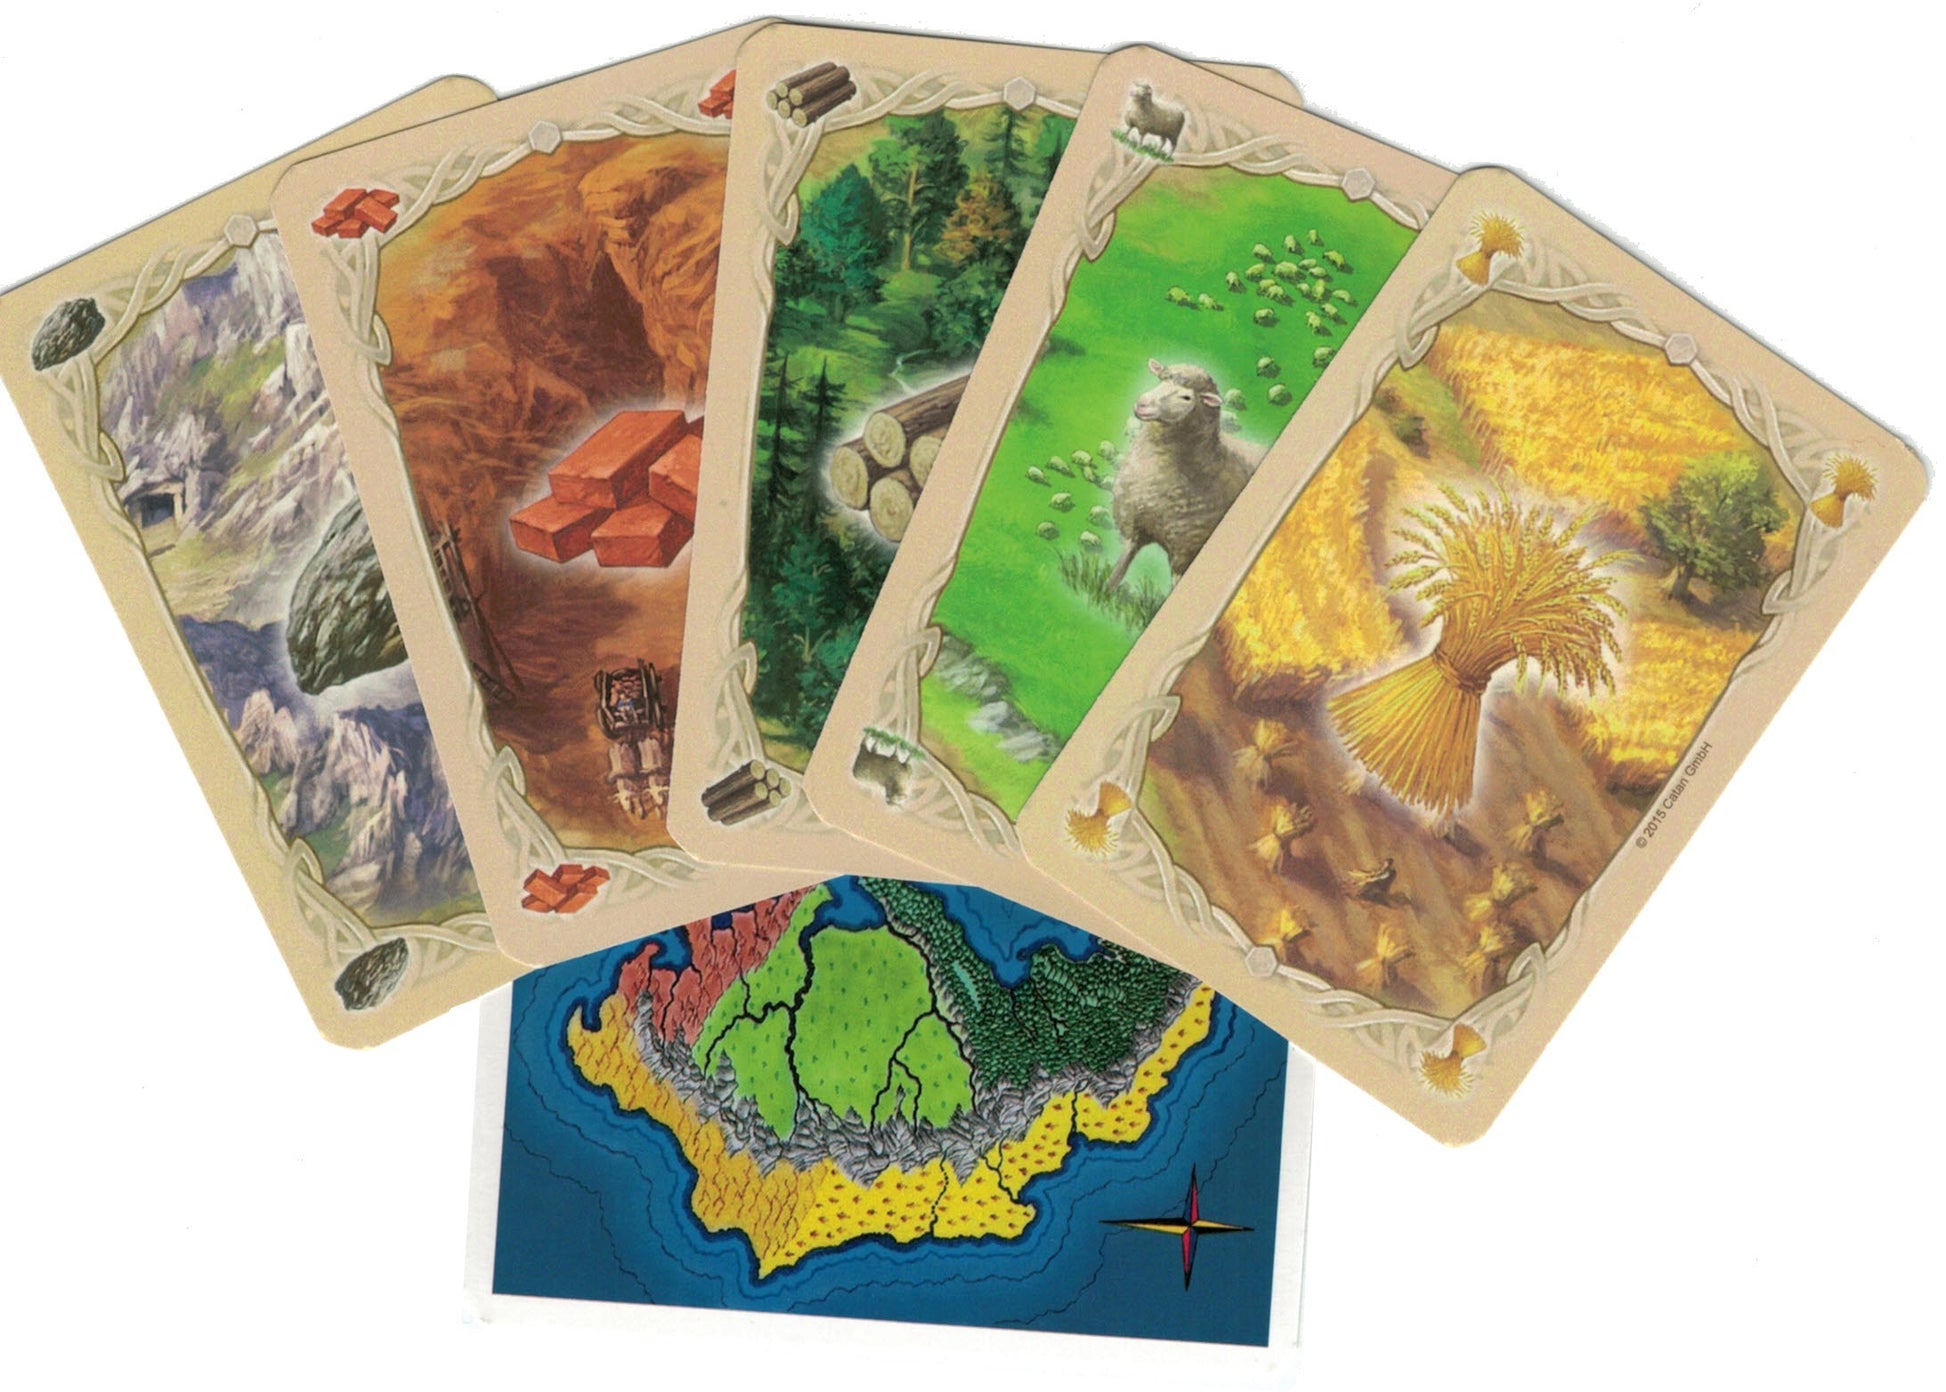 Catan (5th Edition) sample resource cards